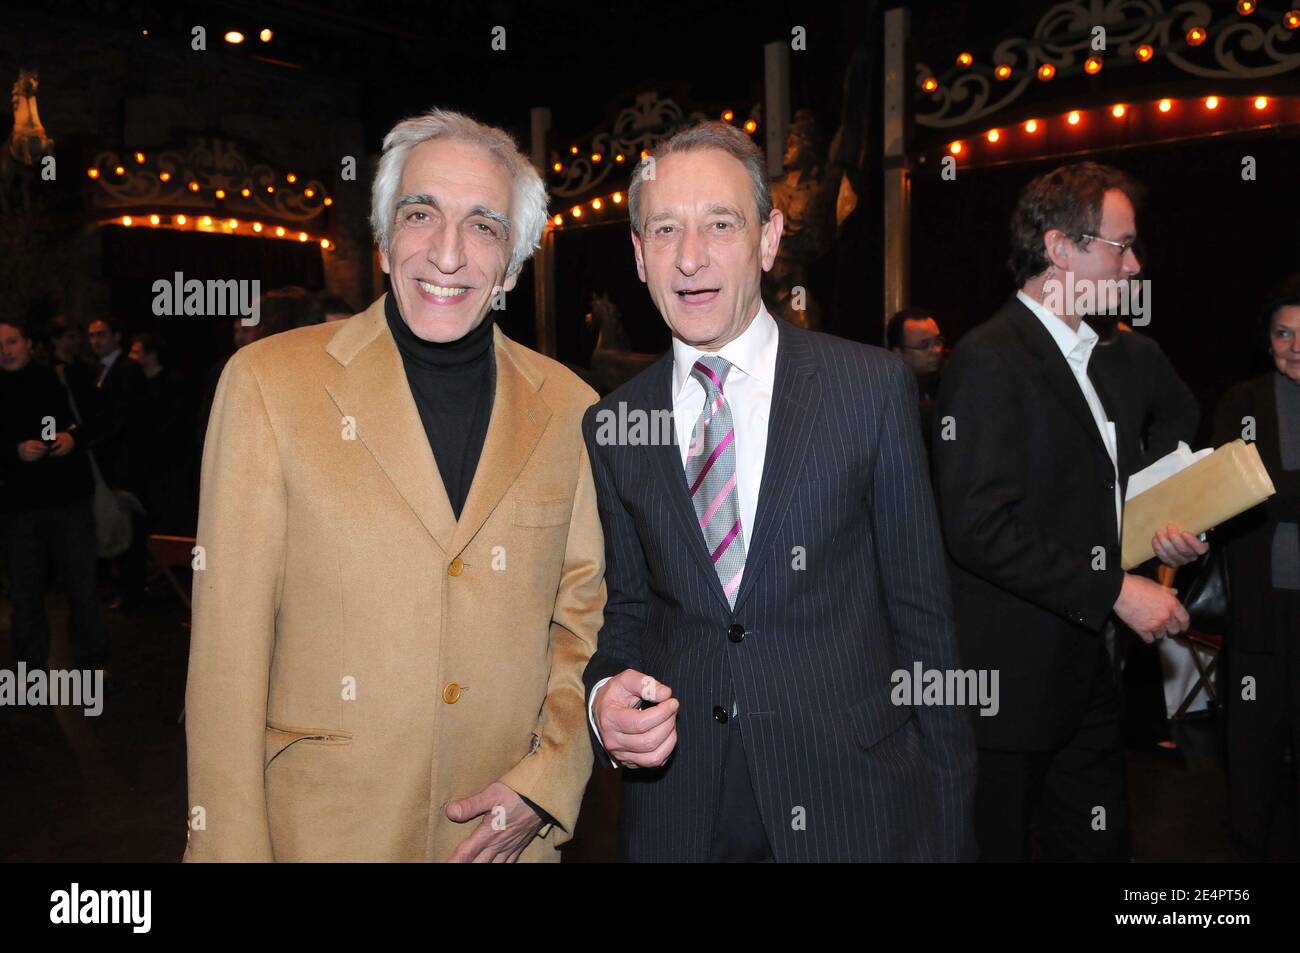 Paris Mayor Bertrand Delanoe and French actor Gerard Darmon seen during a meeting to support Bertrand Delanoe for mayoral elections at the 'Musee des Arts Forains' in Paris, France, on February 18, 2008. Photo by Ammar Abd Rabbo/ABACAPRESS.COM Stock Photo